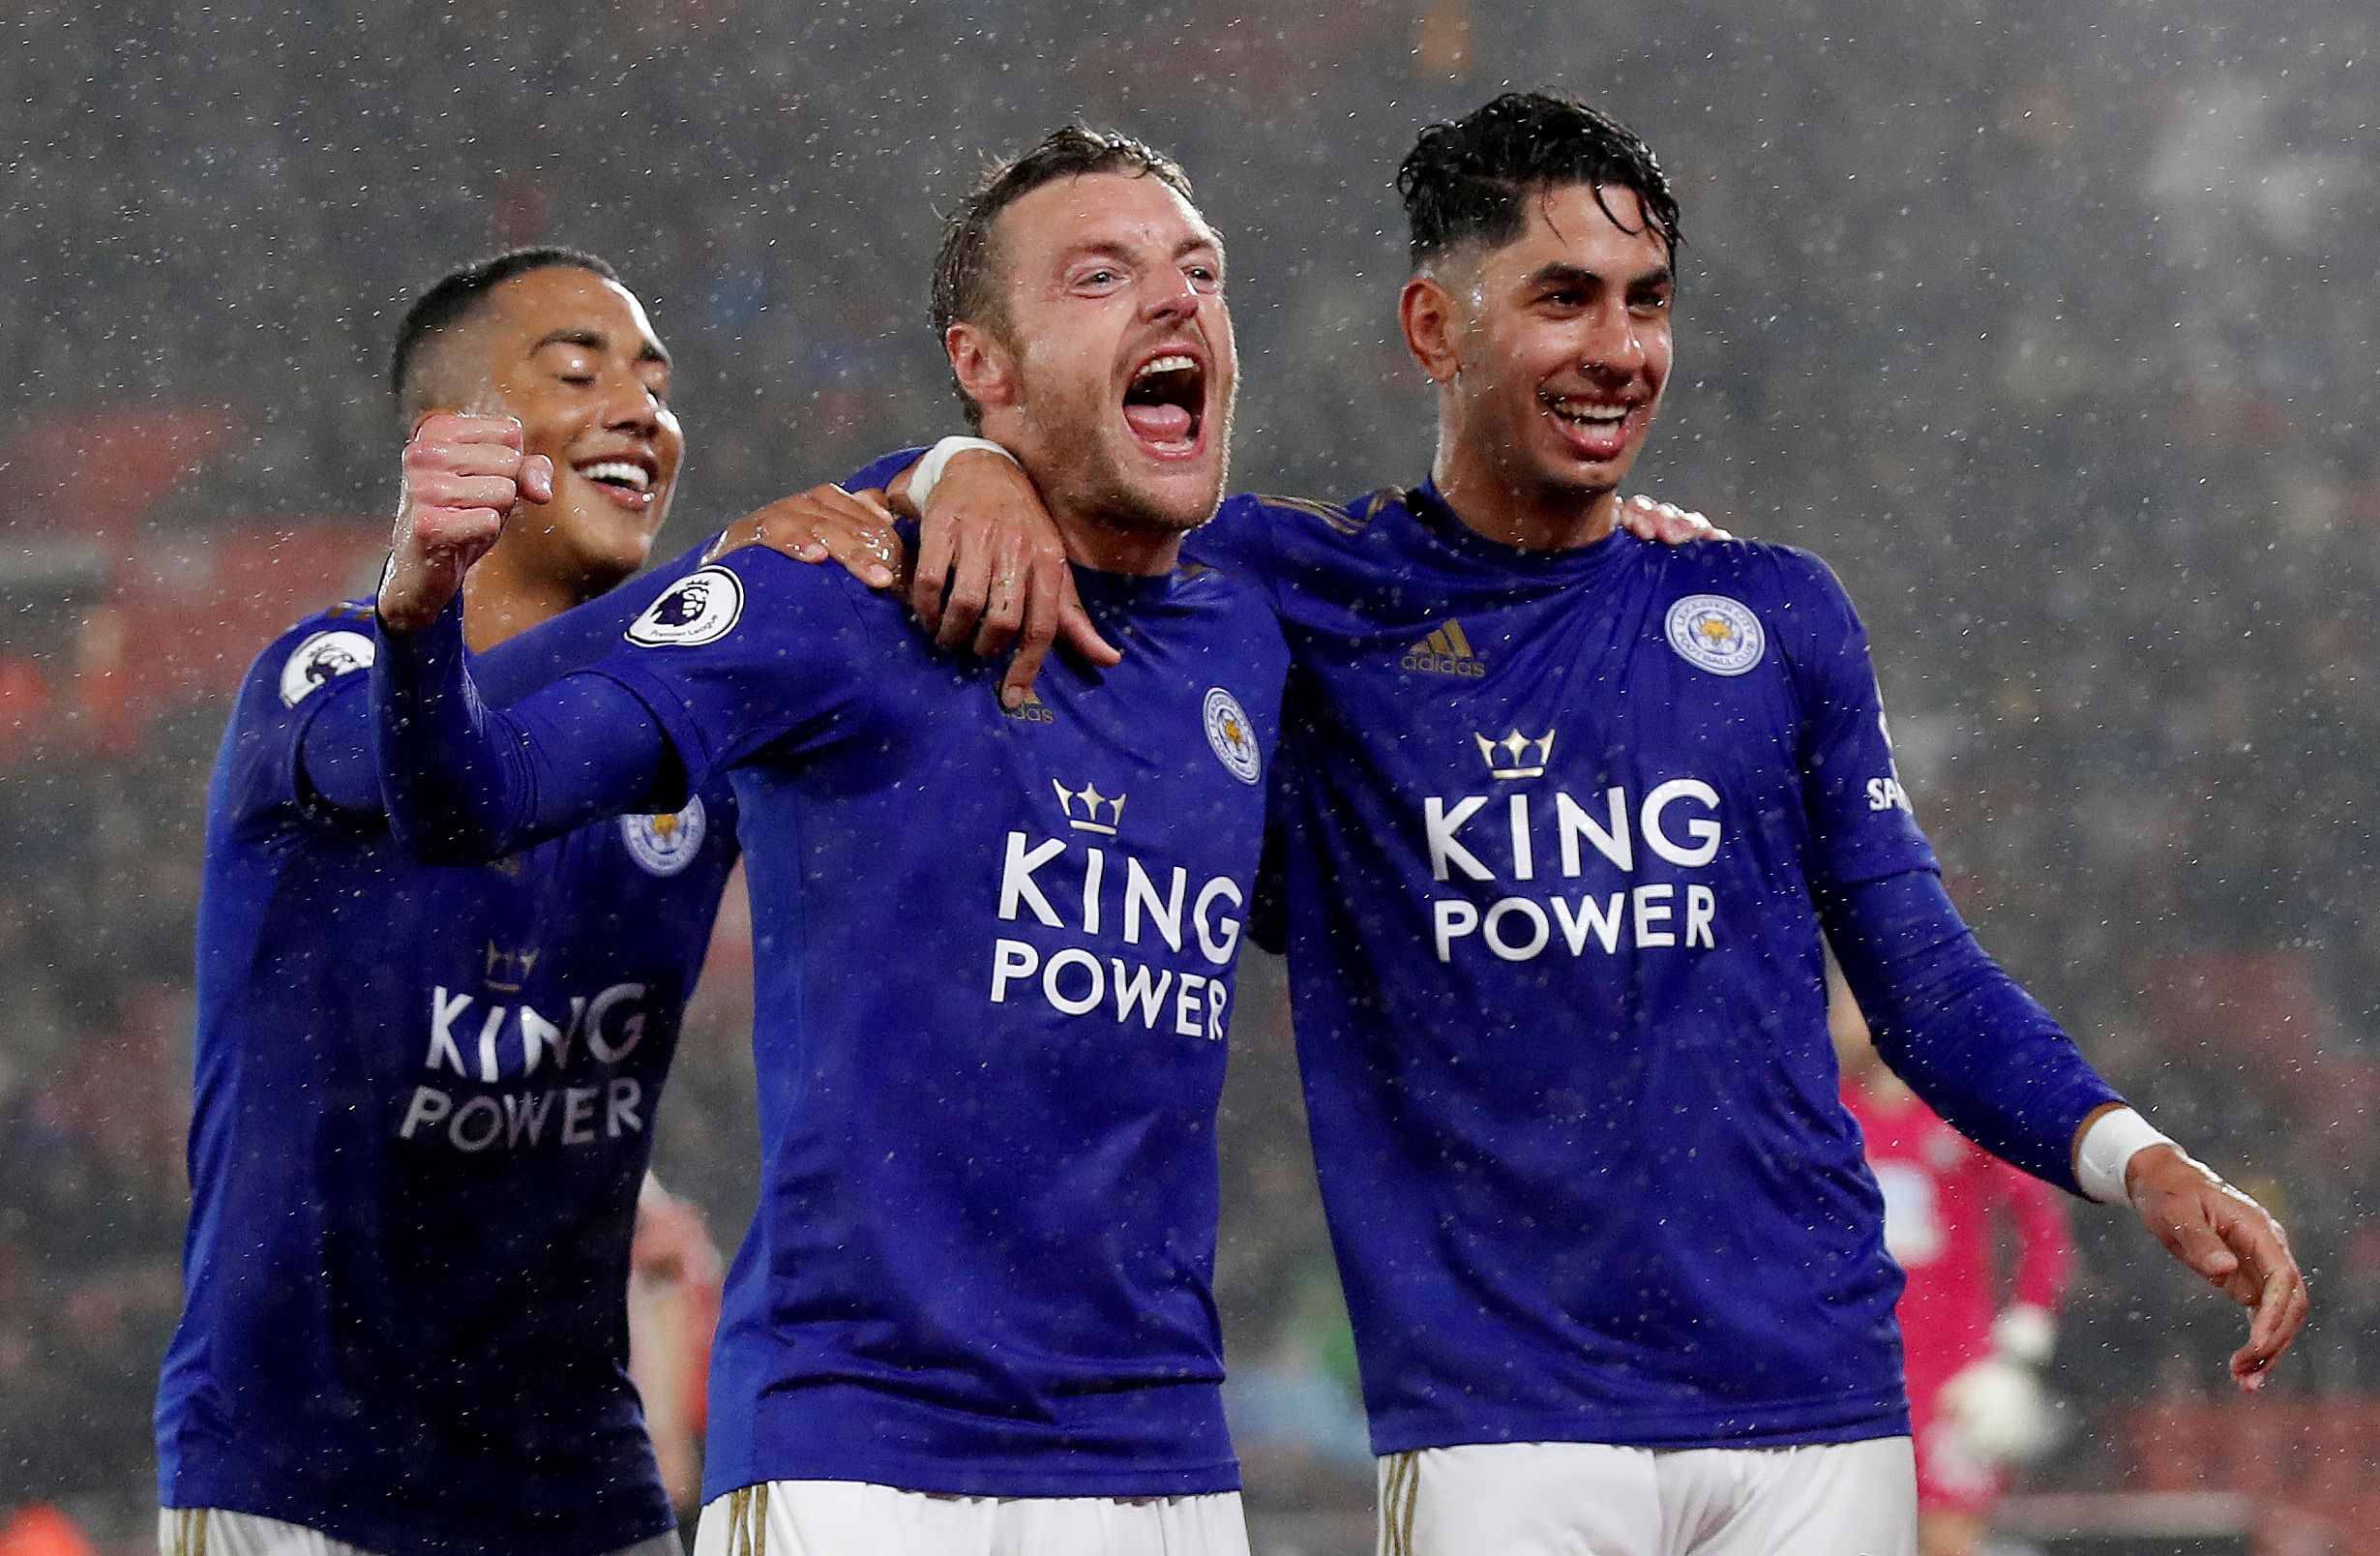 Leicester City’s Jamie Vardy (centre) celebrates with team-mates Ayoze Perez (right) and Youri Tielemans after scoring their fifth goal against Southampton. Reuters  